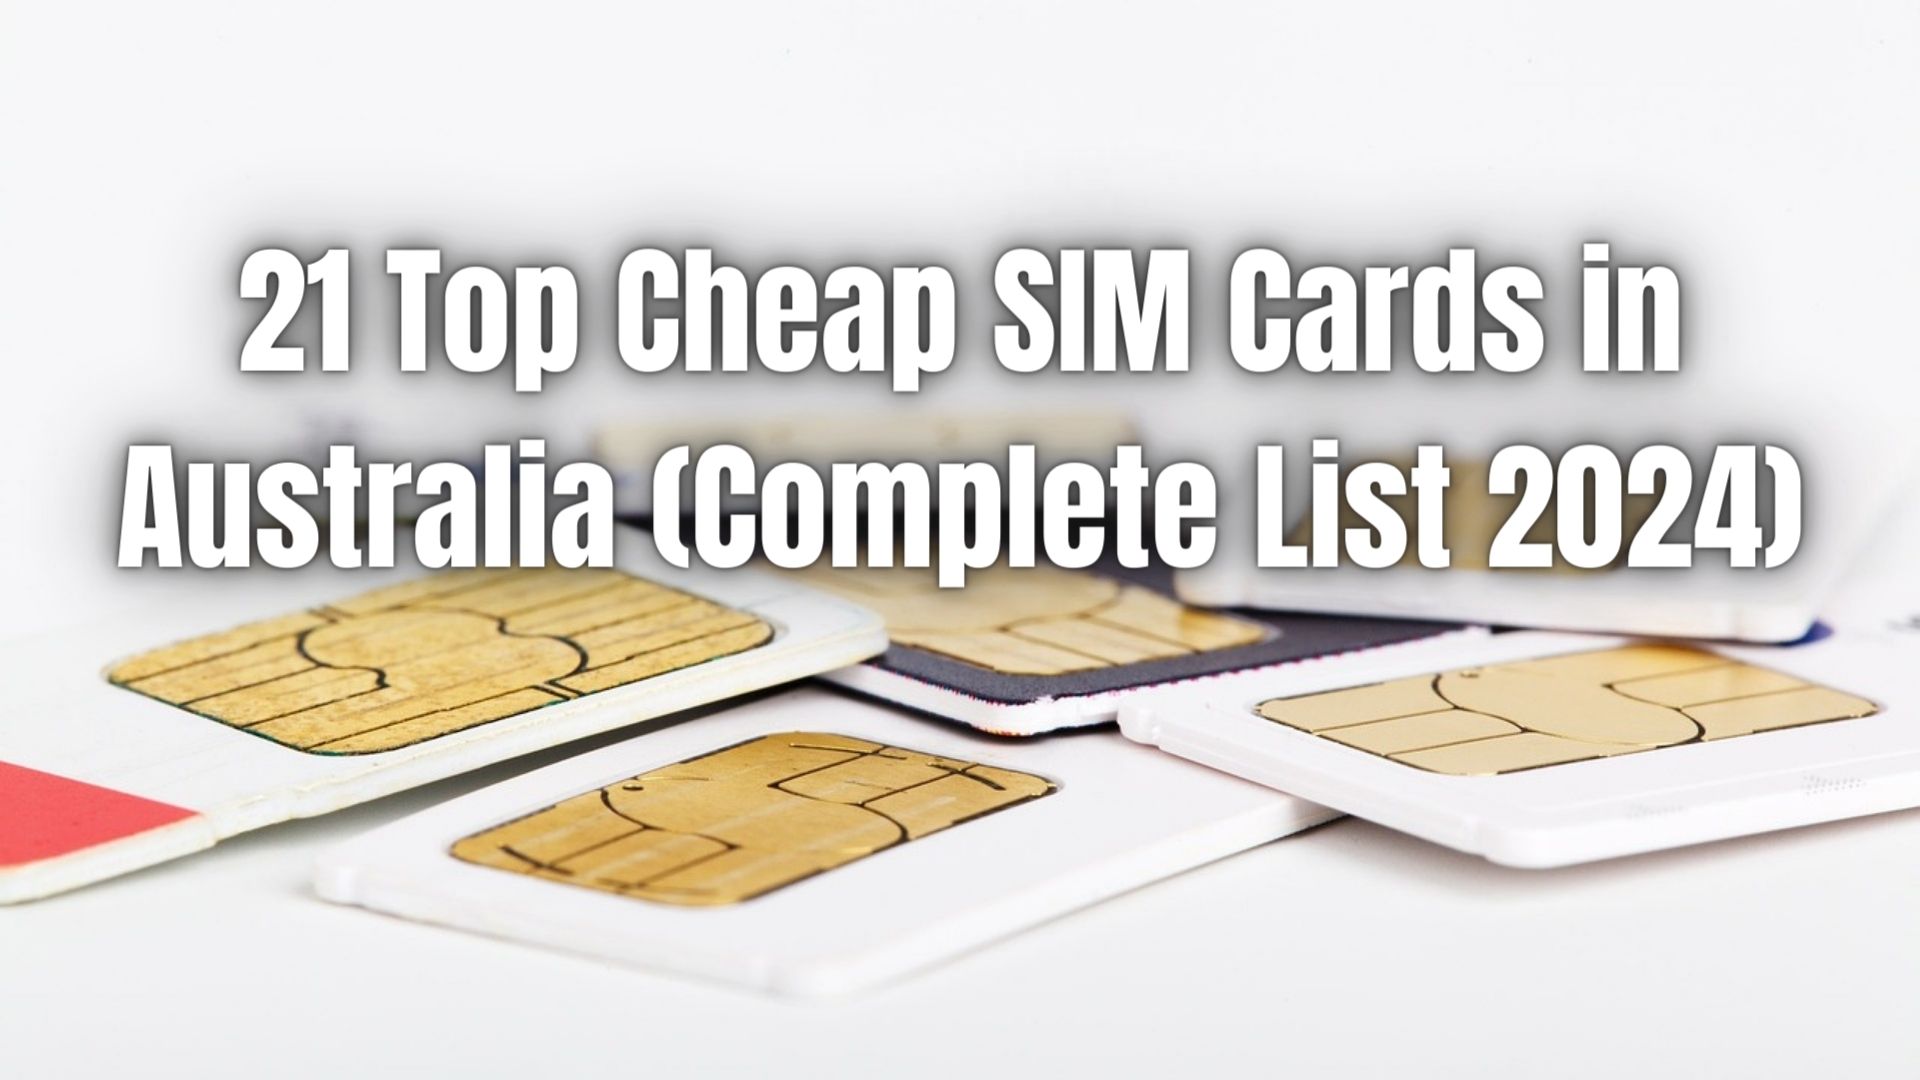 Whether you're traveling or staying long-term in Australia, our guide helps you find the best deals on cheap SIM cards in Australia for 2024.